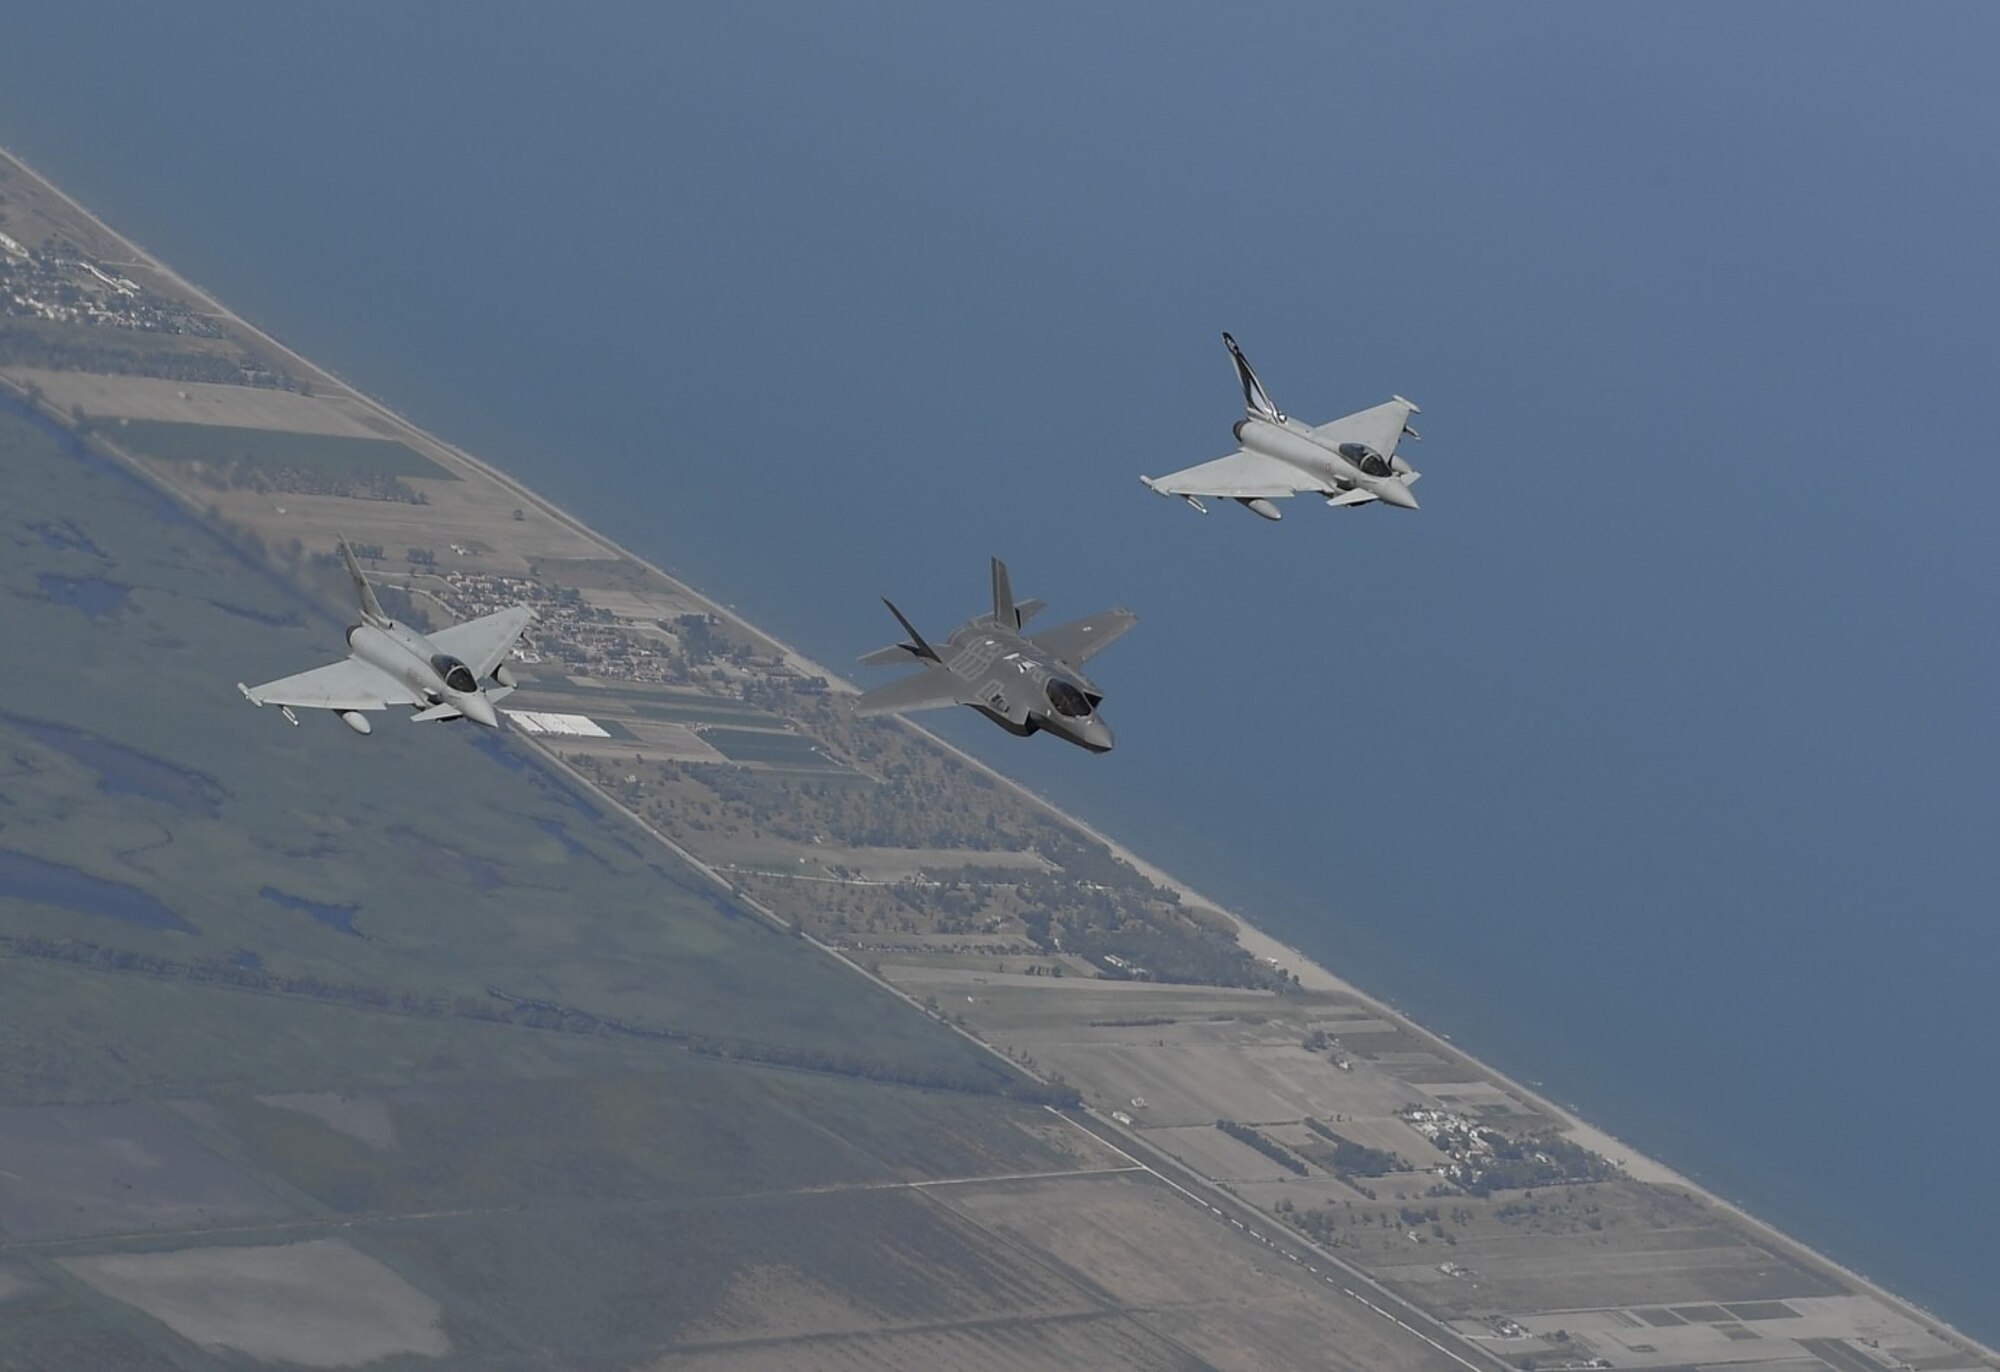 Italian air force F-35 and Eurofighter Typhoons fly in formation over Italy during a training mission with U.S. Air Force F-35A Lightning II aircraft, July 2, 2019. F-35s possess a unique combination of stealth, speed, agility, and situational awareness along with lethal long-range, air-to-air and air-to-ground weaponry, making these aircraft the best air dominance fighters in the world. (Courtesy photo)